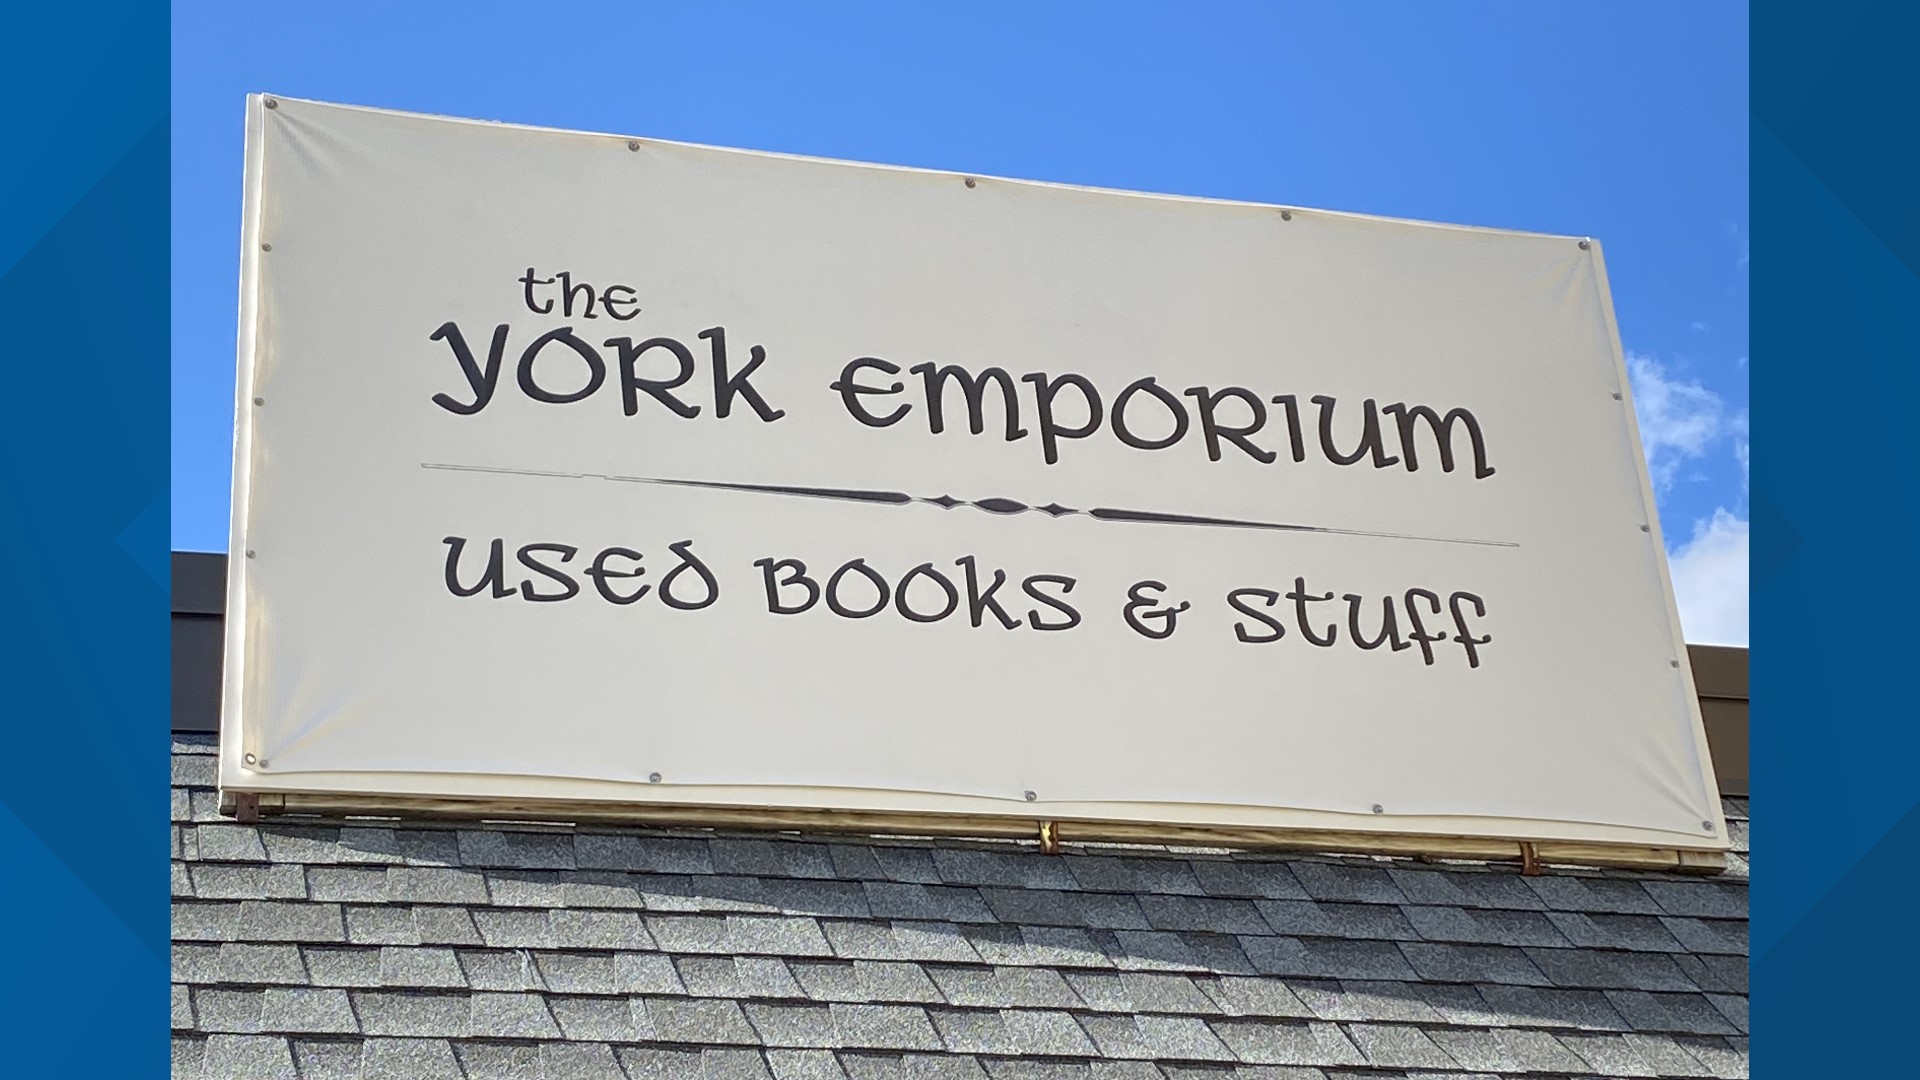 Former York Emporium manager talks about his experience owning the York County bookstore.